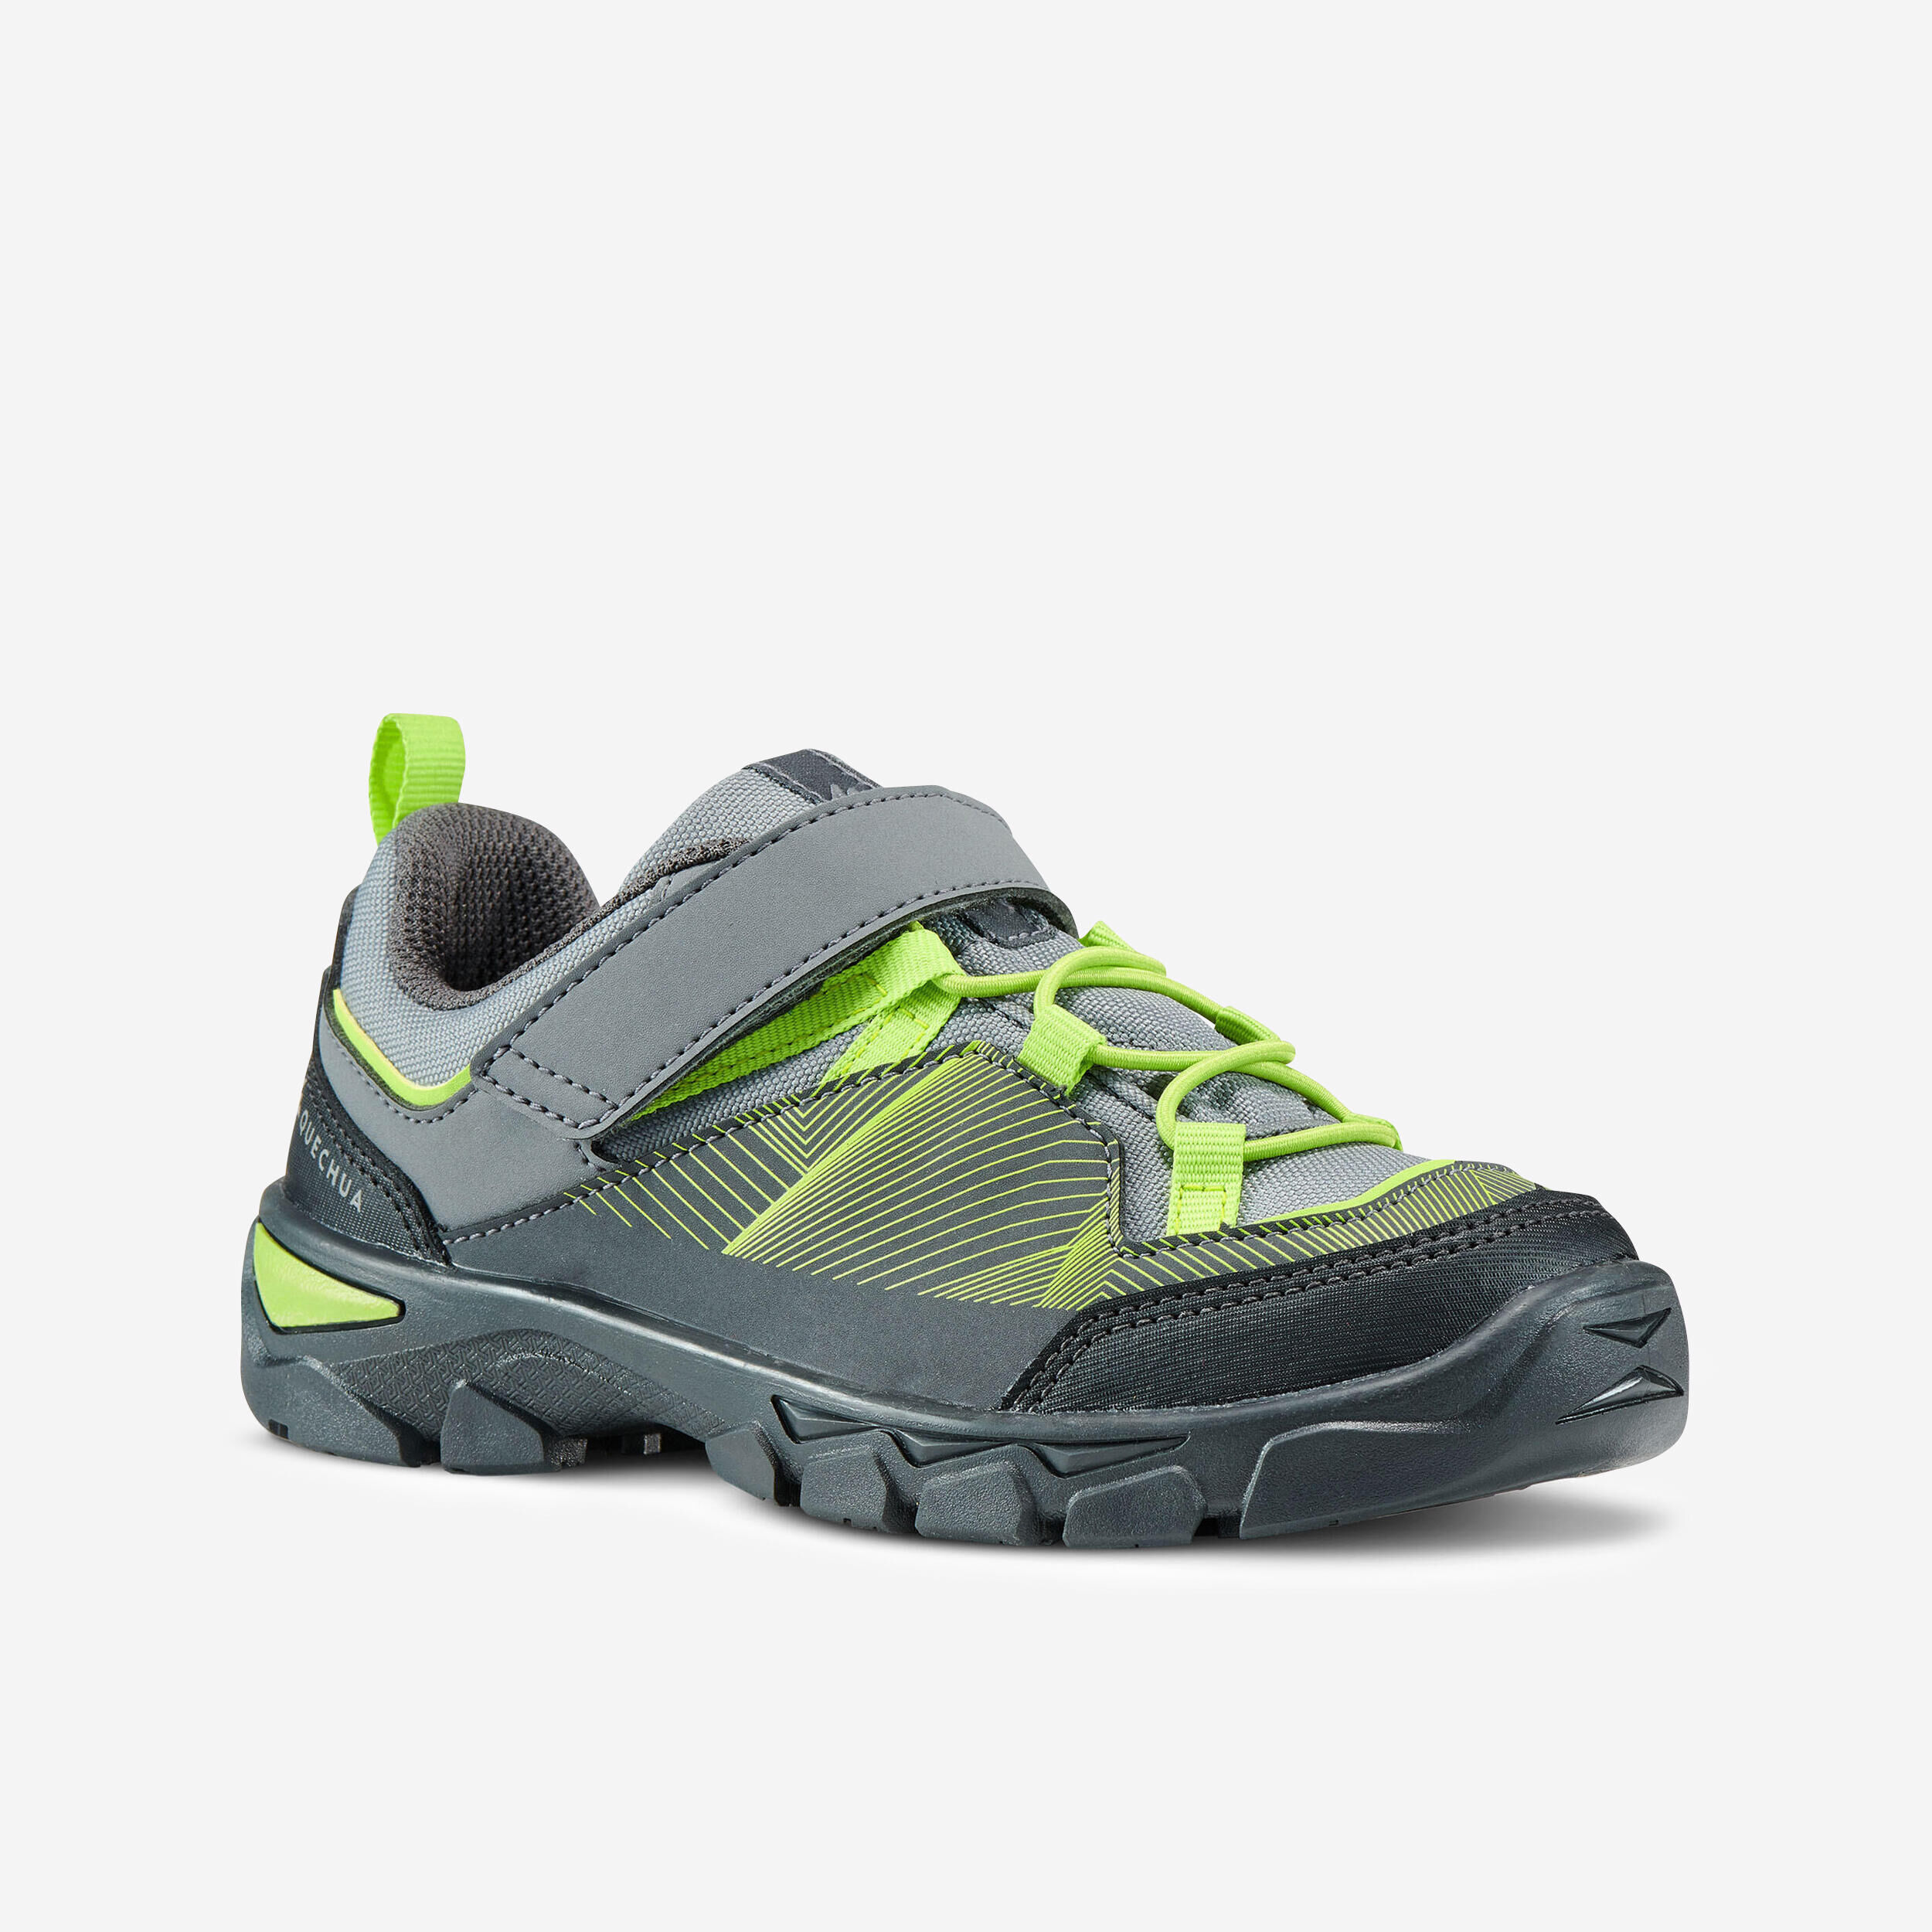 QUECHUA Kids' Velcro Hiking Shoes MH120 LOW 28 to 34 - Grey and Green